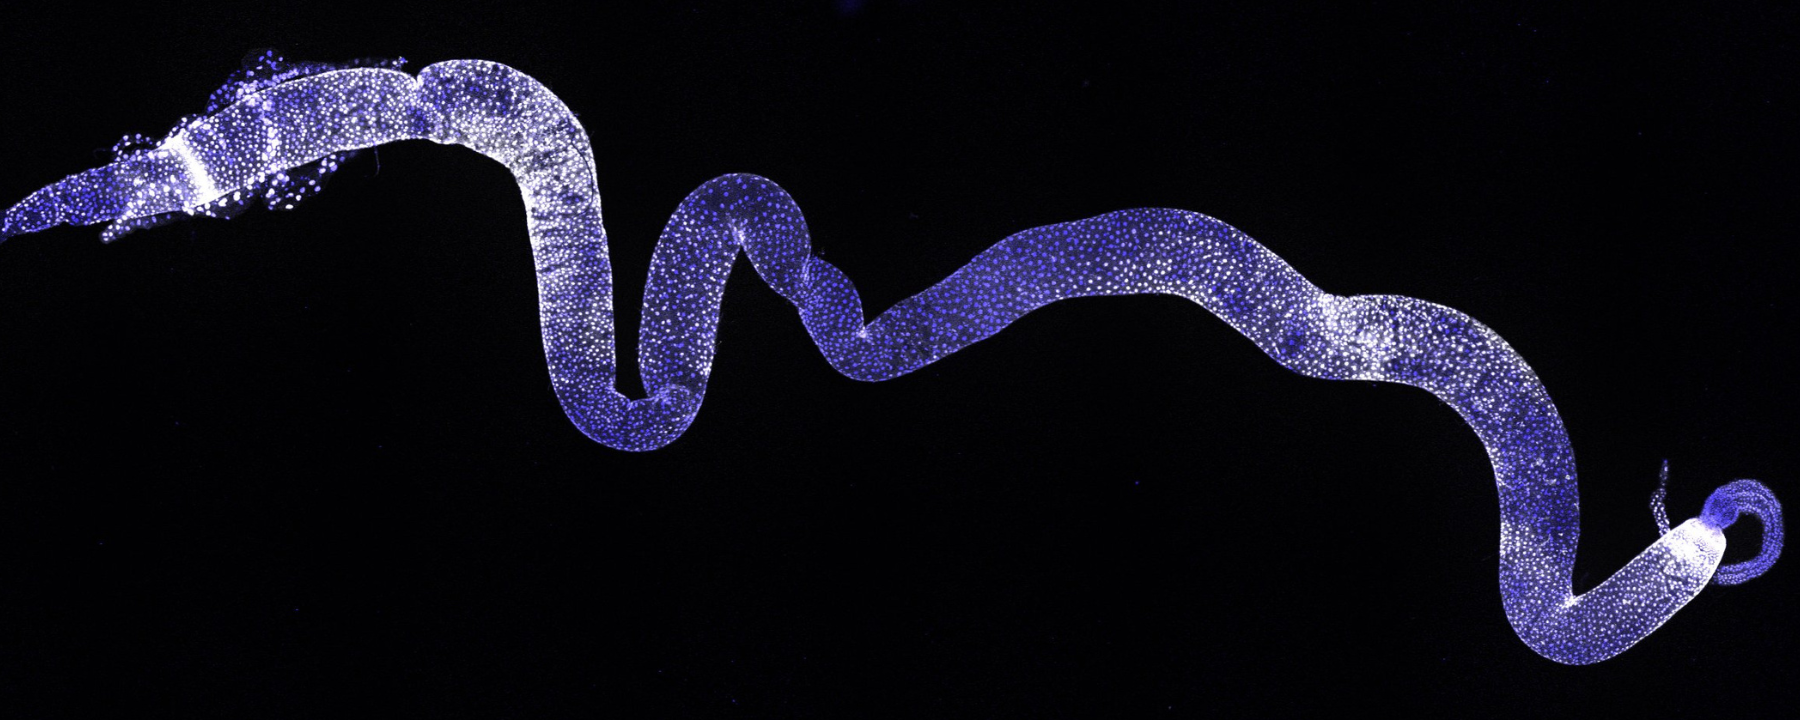 An image of the Drosophila gut, the structure that is equivalent to the human small intestine. Blue fluorescence marks cell nuclei and white fluorescence shows the location of a phosphorylated protein involved in the signalling pathway that establishes a molecular gradient to maintain tissue patterning and homeostasis.